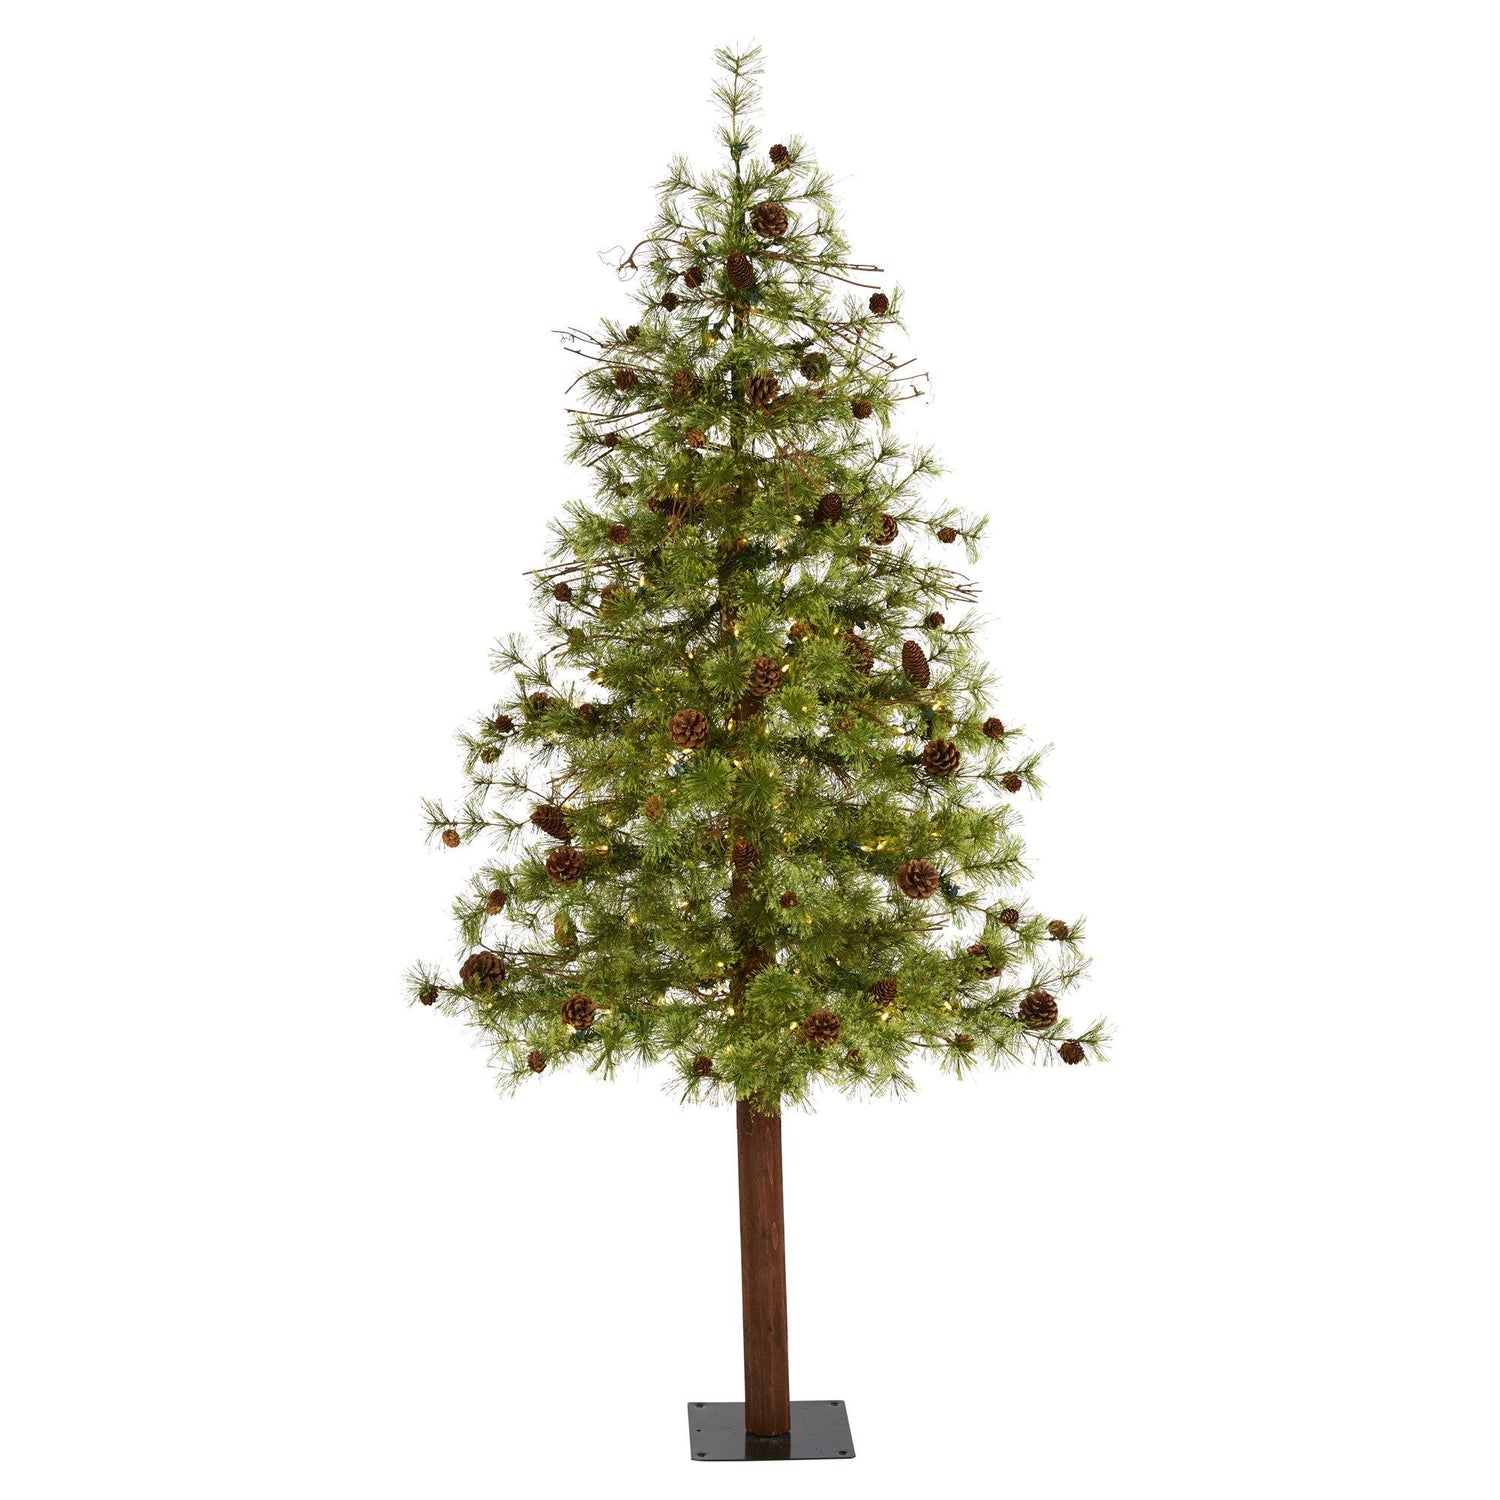 6' Wyoming Alpine Artificial Christmas Tree with 150 Clear (multifunction) LED Lights and Pine Cones on Natural Trunk